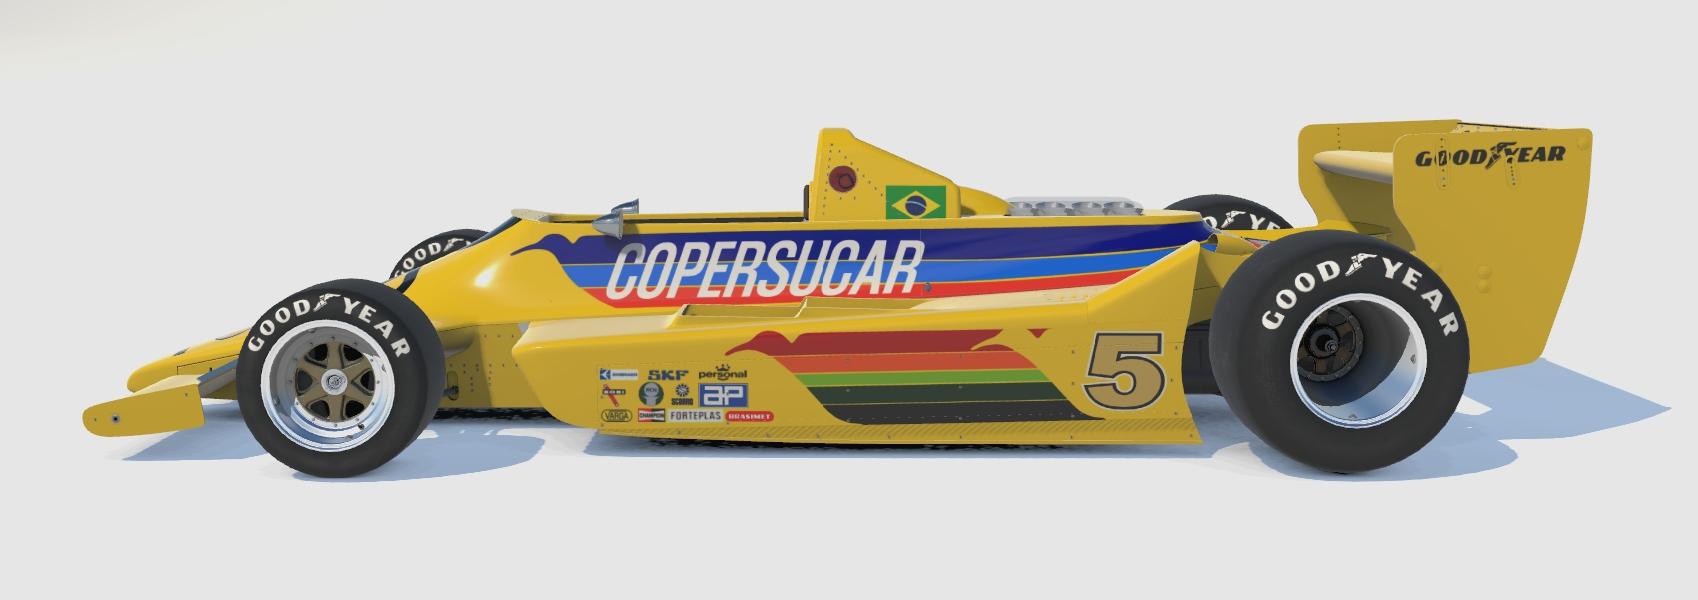 Preview of Lotus 79 Copersucar by Don Craig